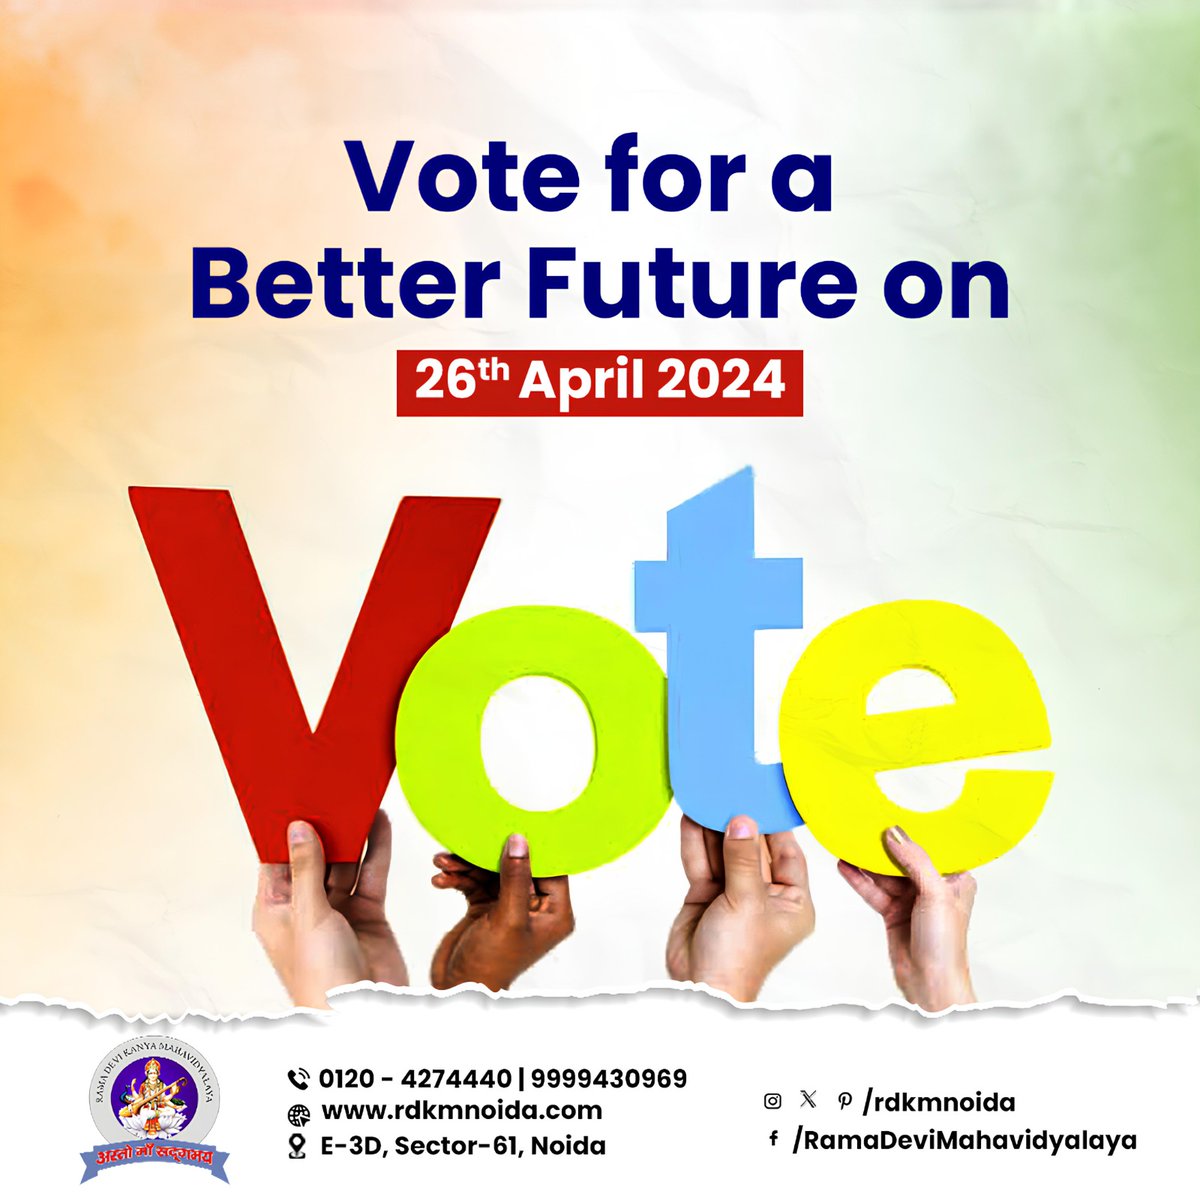 Be the change you want to see. Vote for a better future on 26th April!

#ramadevikanyamahavidyalaya #GoVote #EveryVoteCounts #VotingMatters #BeAVoter #YourVoteYourVoice #ElectionDay #GetOutTheVote #CivicDuty #MakeYourVoiceHeard